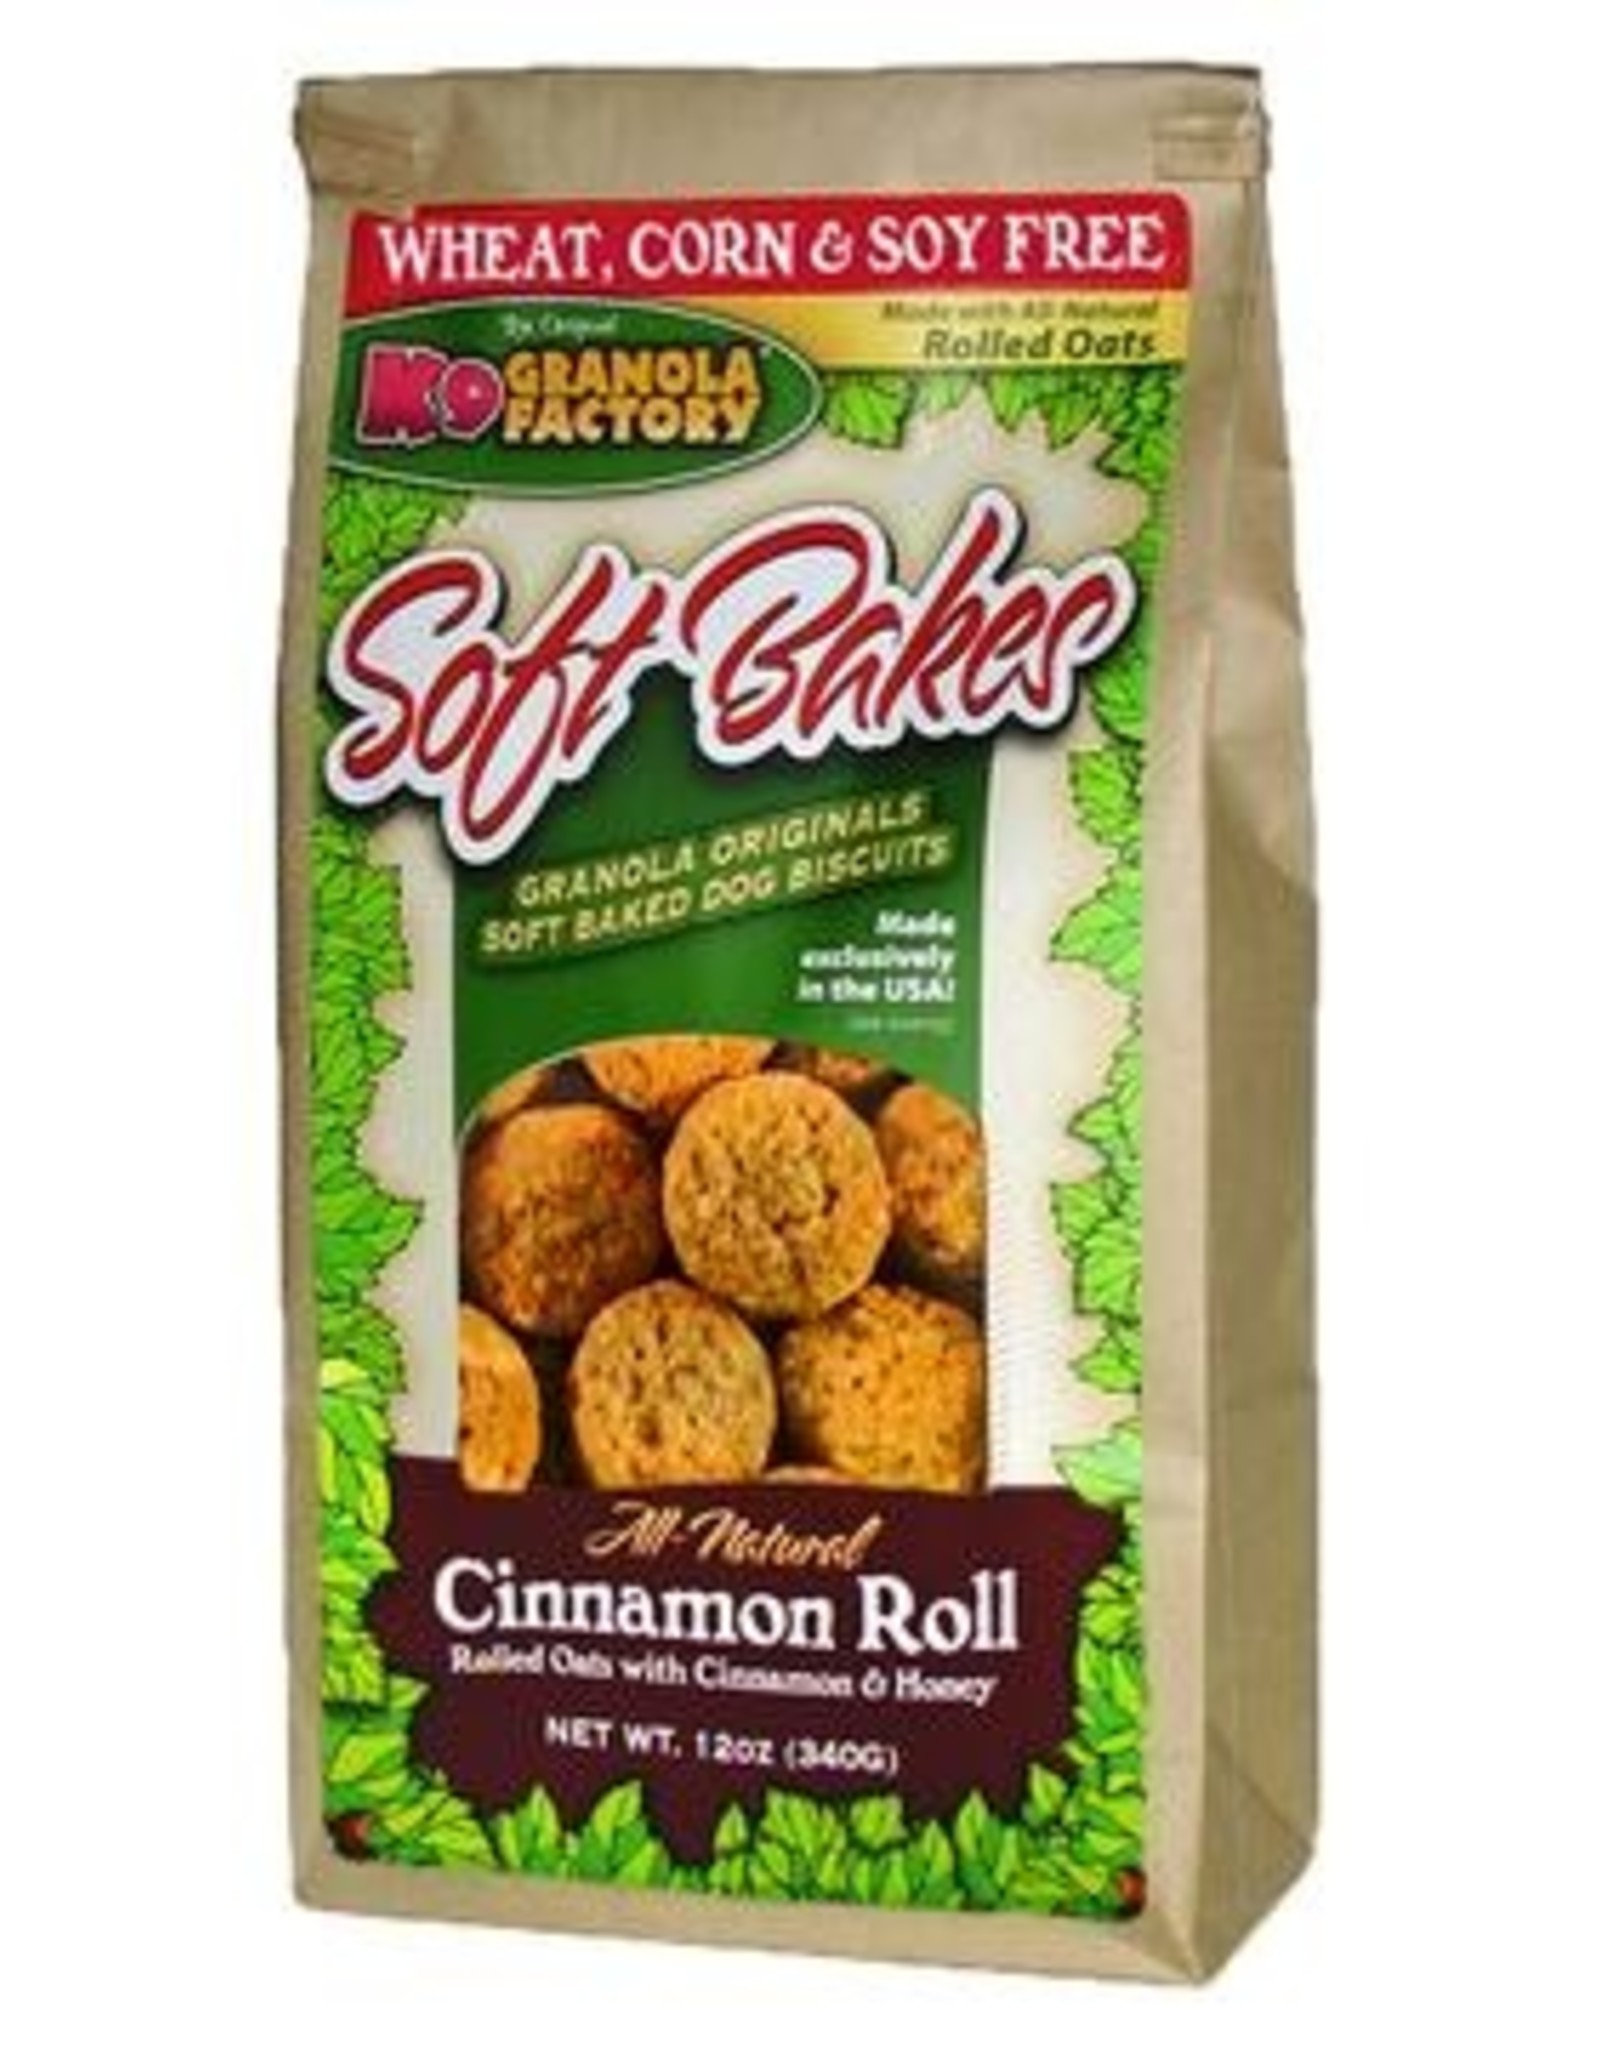 K9 GRANOLA FACTORY K9 GRANOLA FACTORY BISCUITS SOFT BAKES CINNAMON ROLL 12OZ